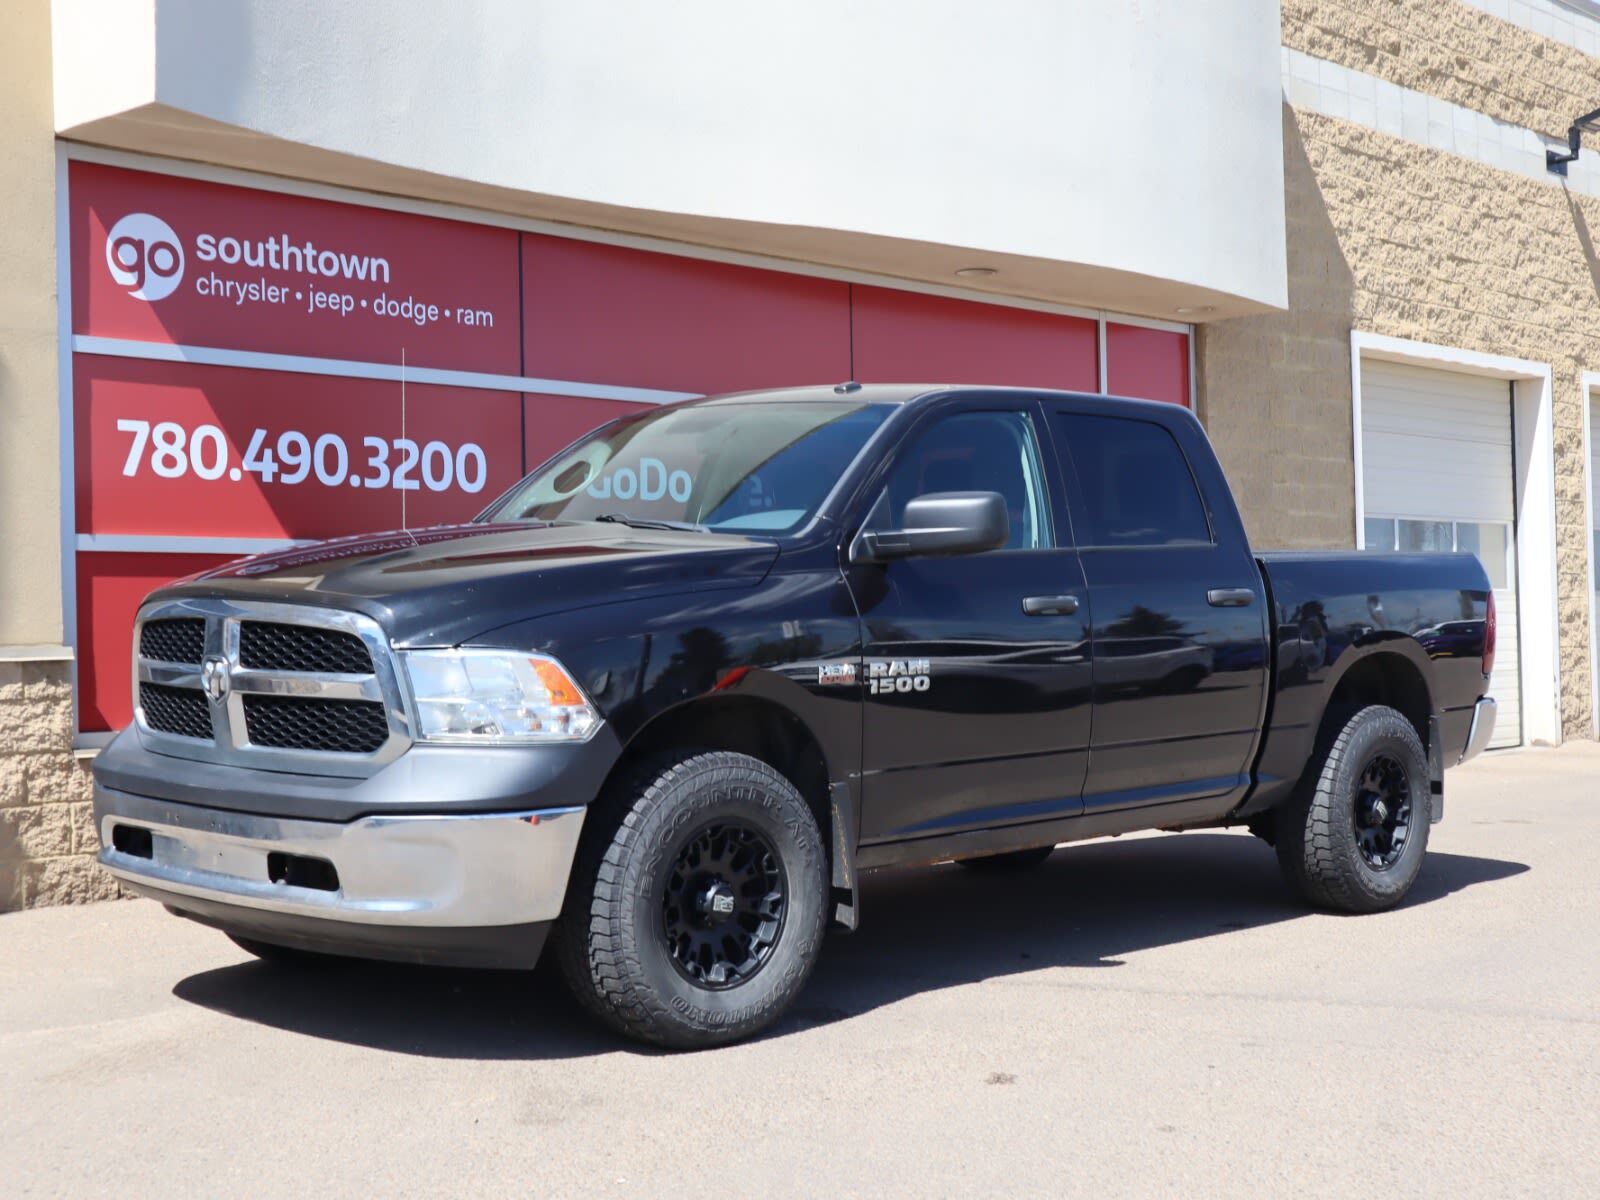 2015 Ram 1500 SXT IN BRILLIANT BLACK EQUIPPED WITH A 5.7L HEMI V